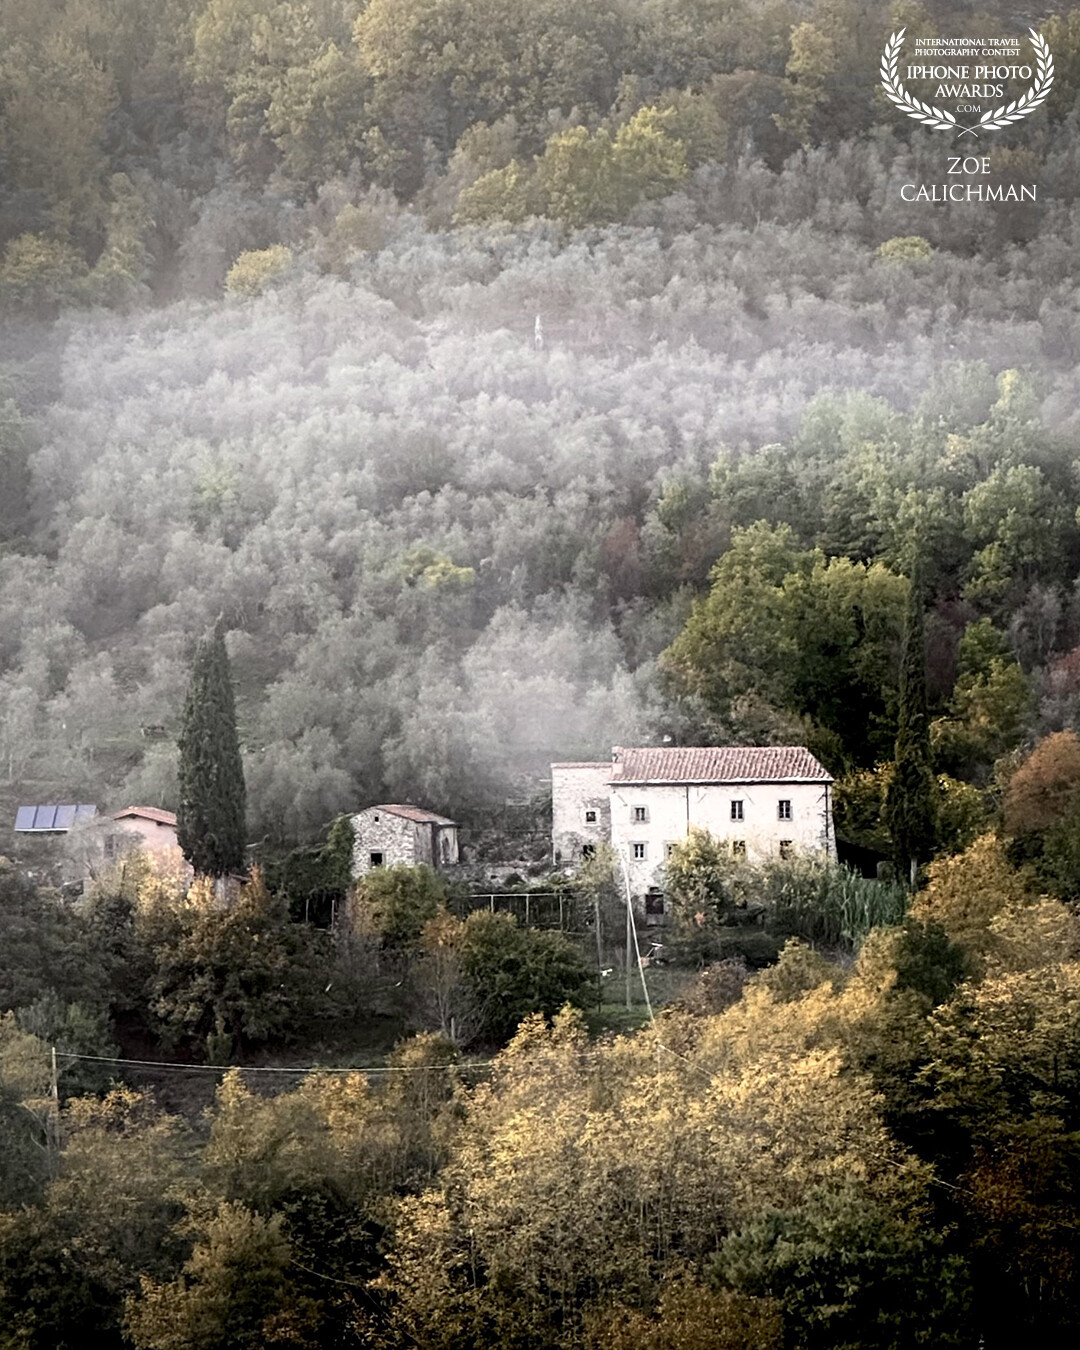 A charming stone house nestled in a Tuscany village where I met the kindest host and hostess. They open their house for a retreat facilitated by Sif Orellana for her famous sisterhood retreat. One of the best trips I had in recent years.